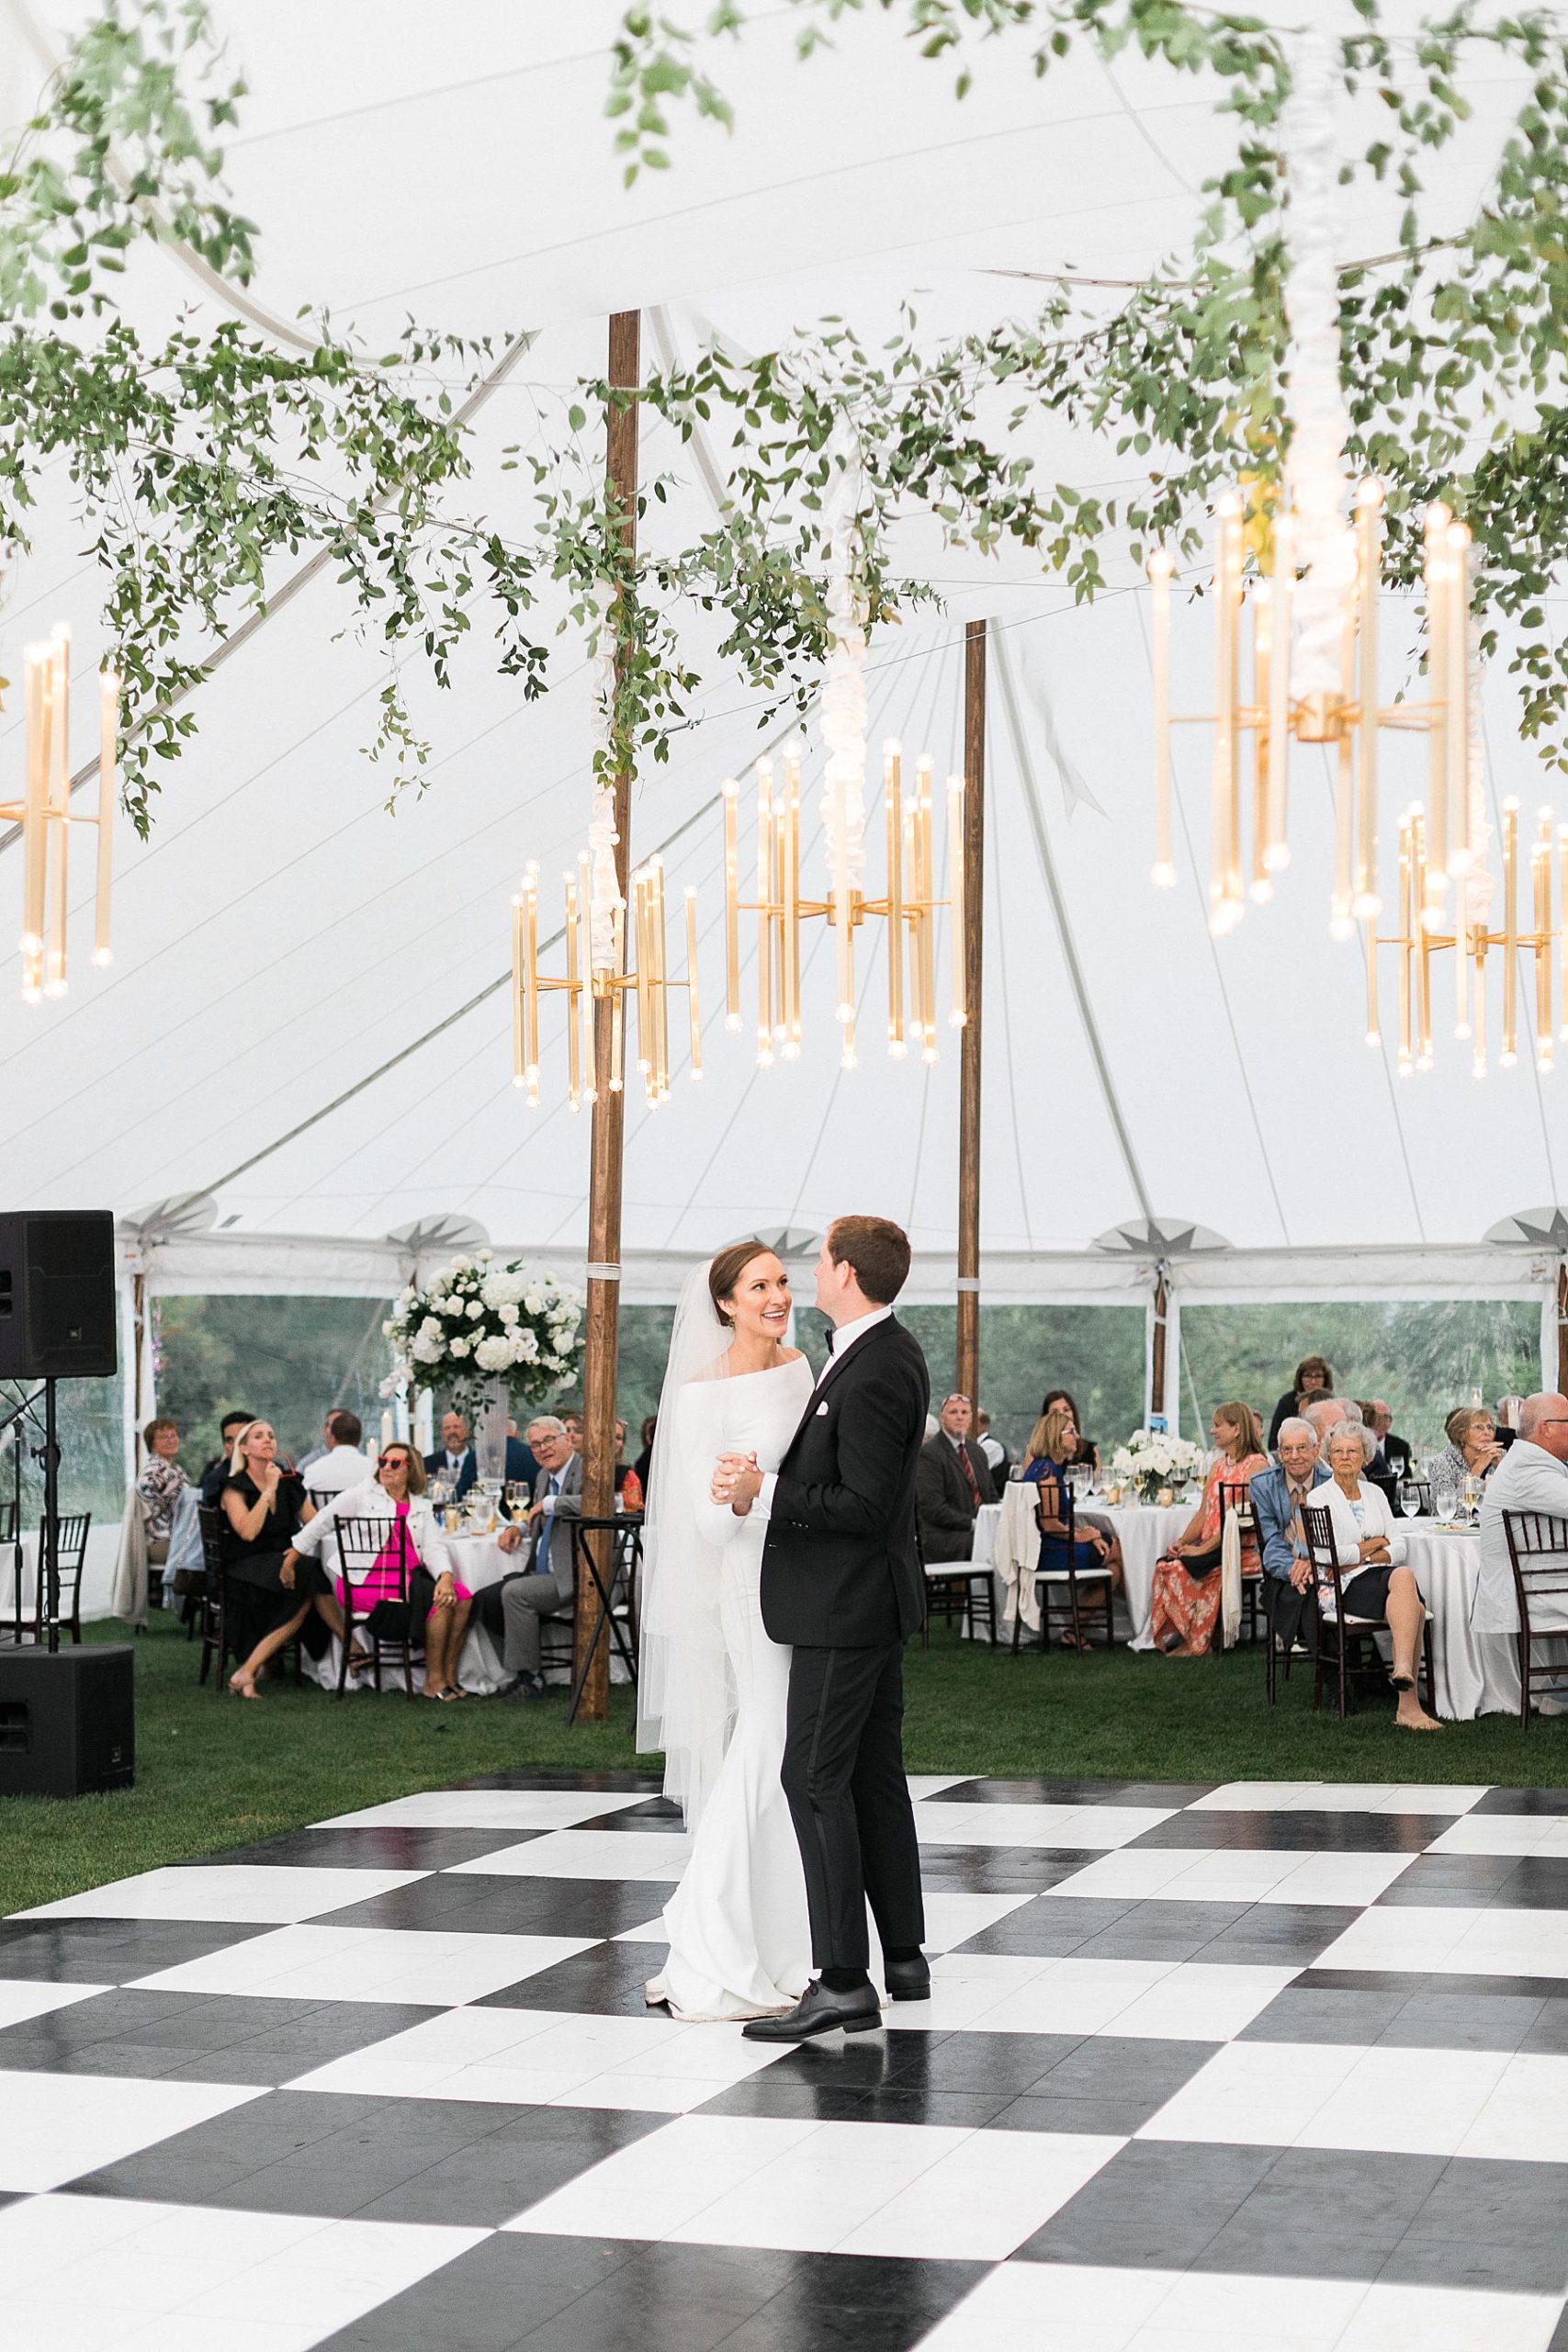 newlyweds first dance on checkerboard dance floor under a sailcloth tent wedding reception, at horseshoe bay beach club in door county